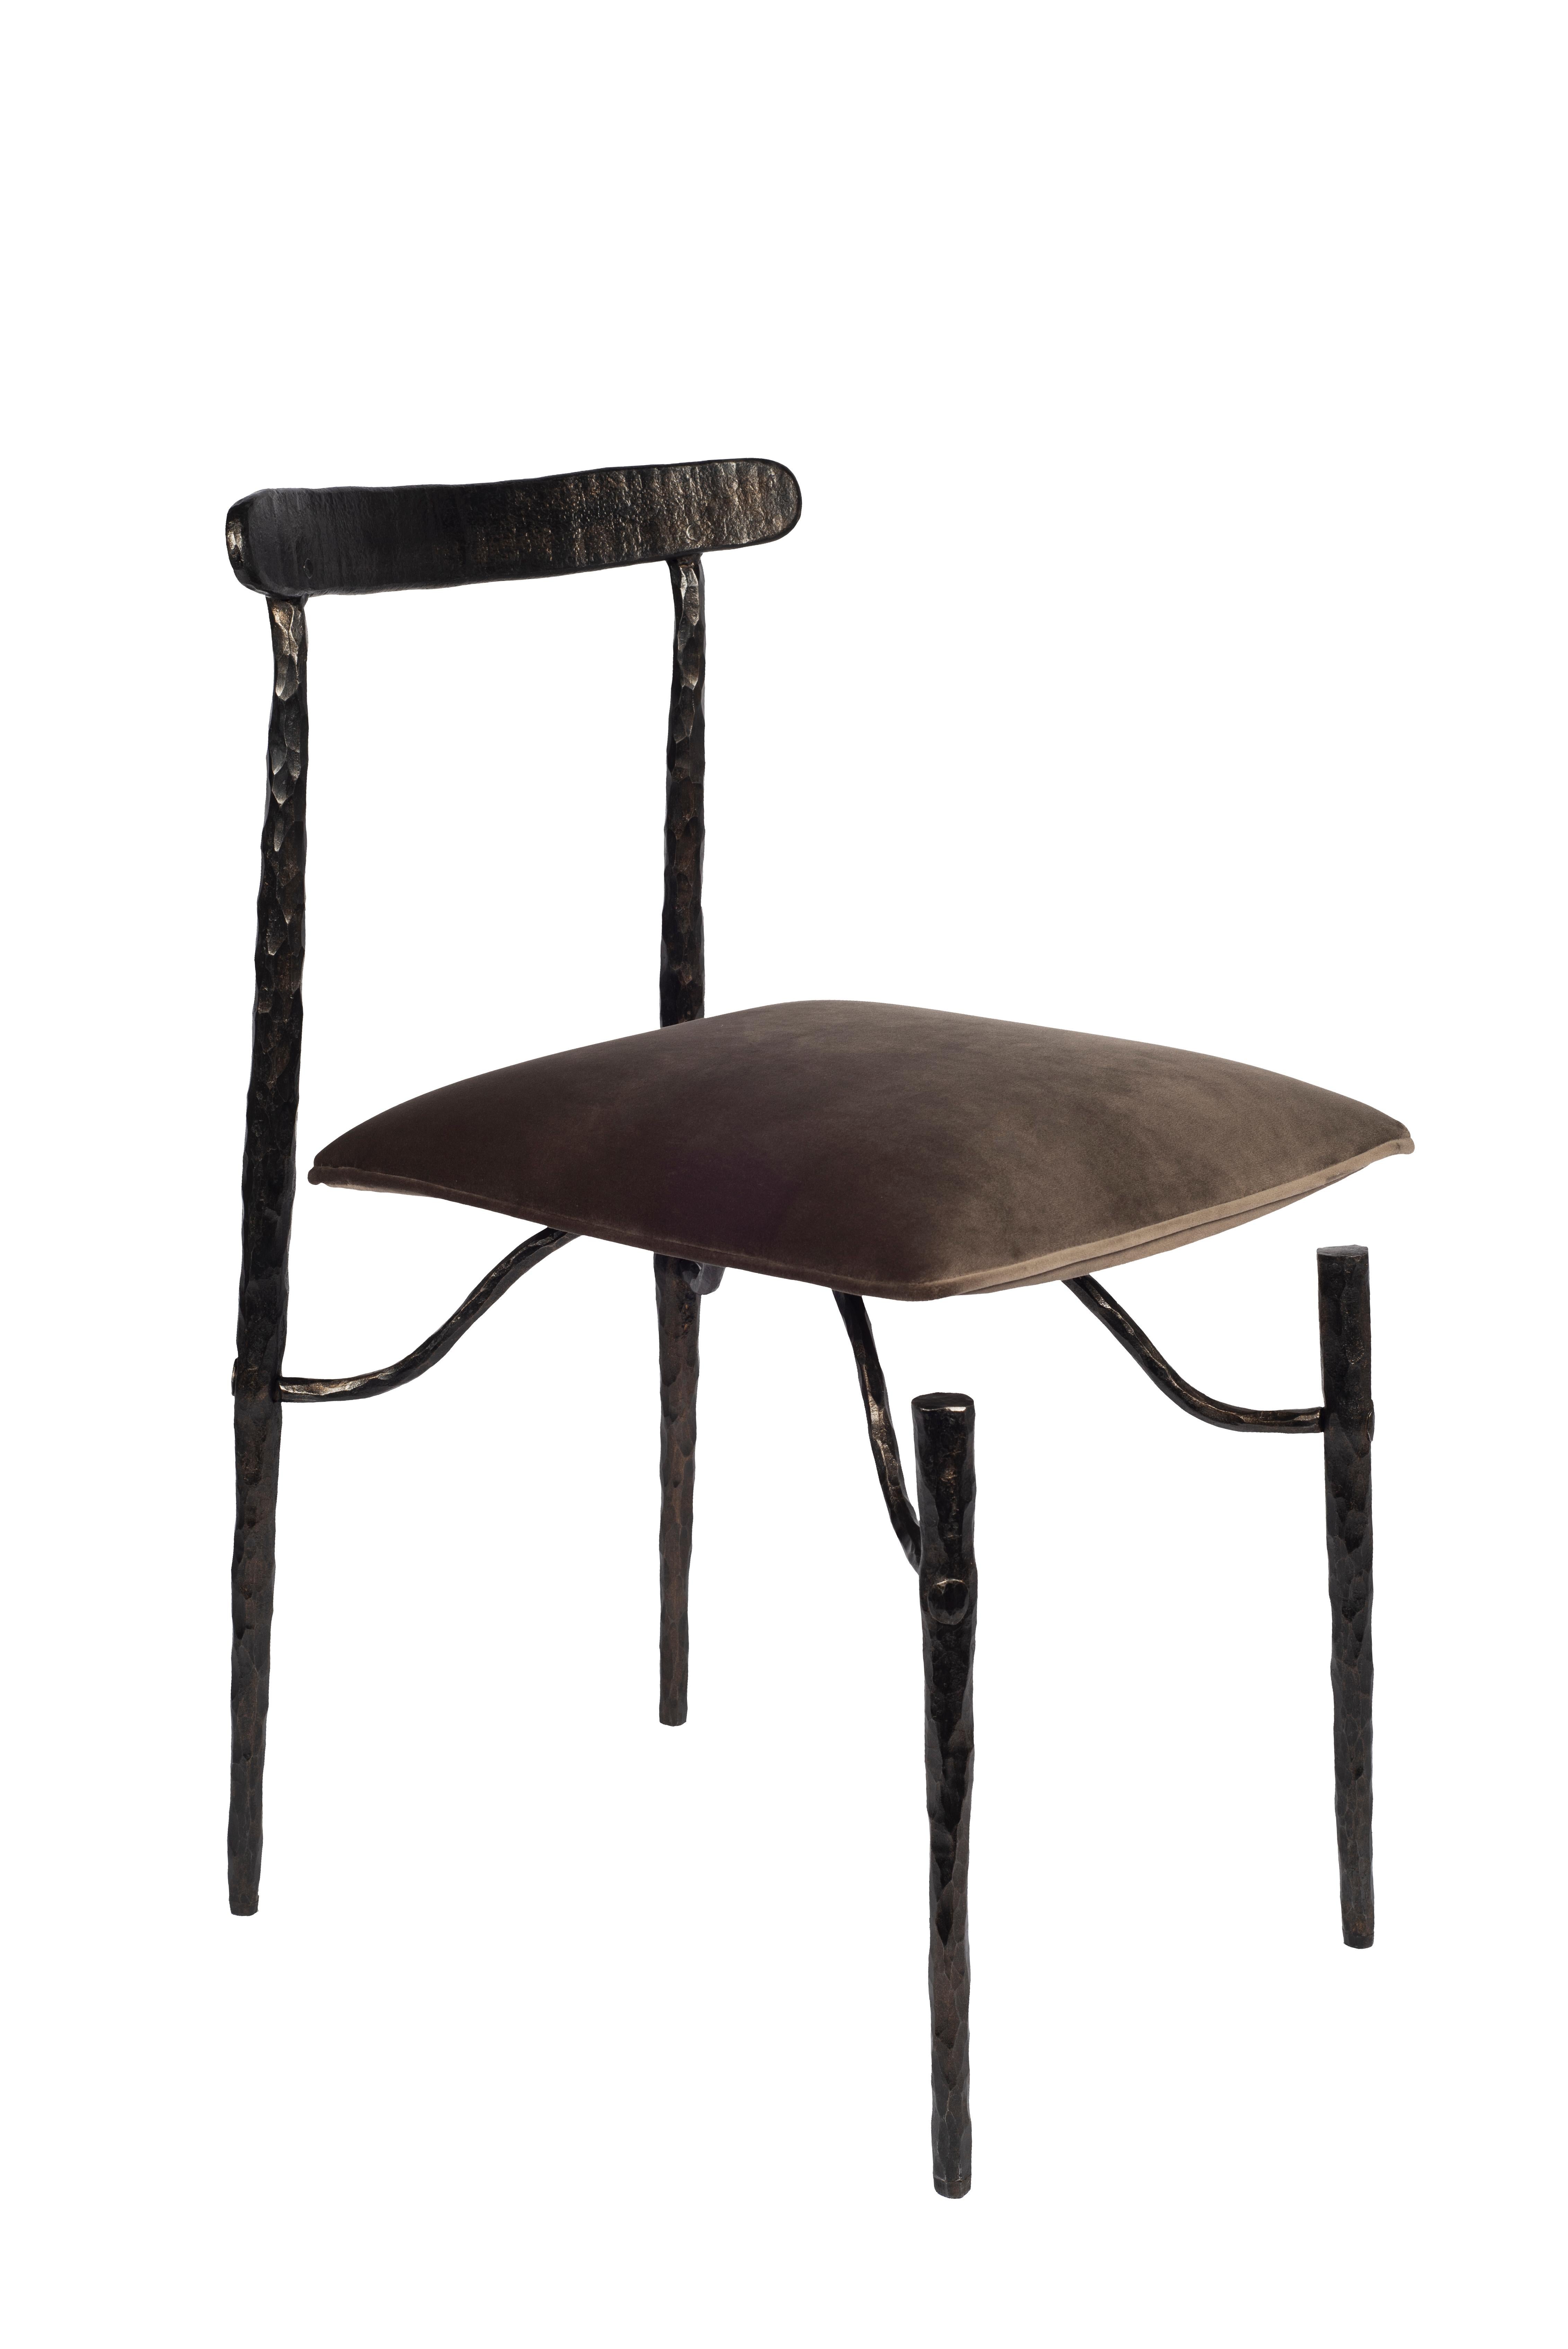 French Ronda Chair, Atelier Linné